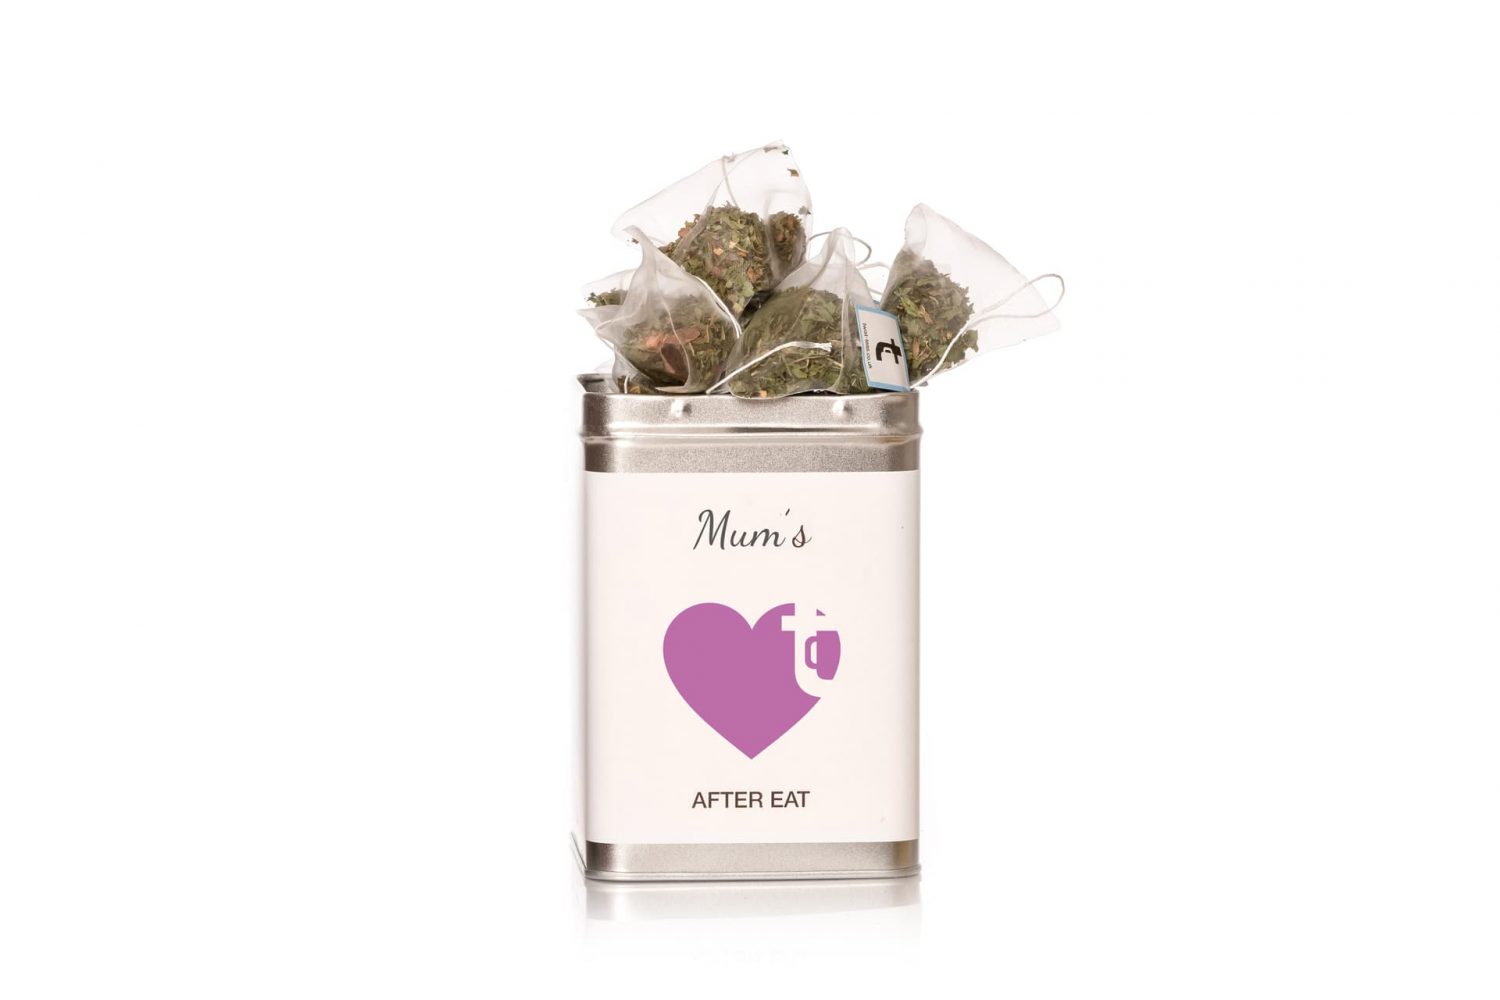 A personalised Tea Caddy for Mother's Day, with tea bags bursting from the top.